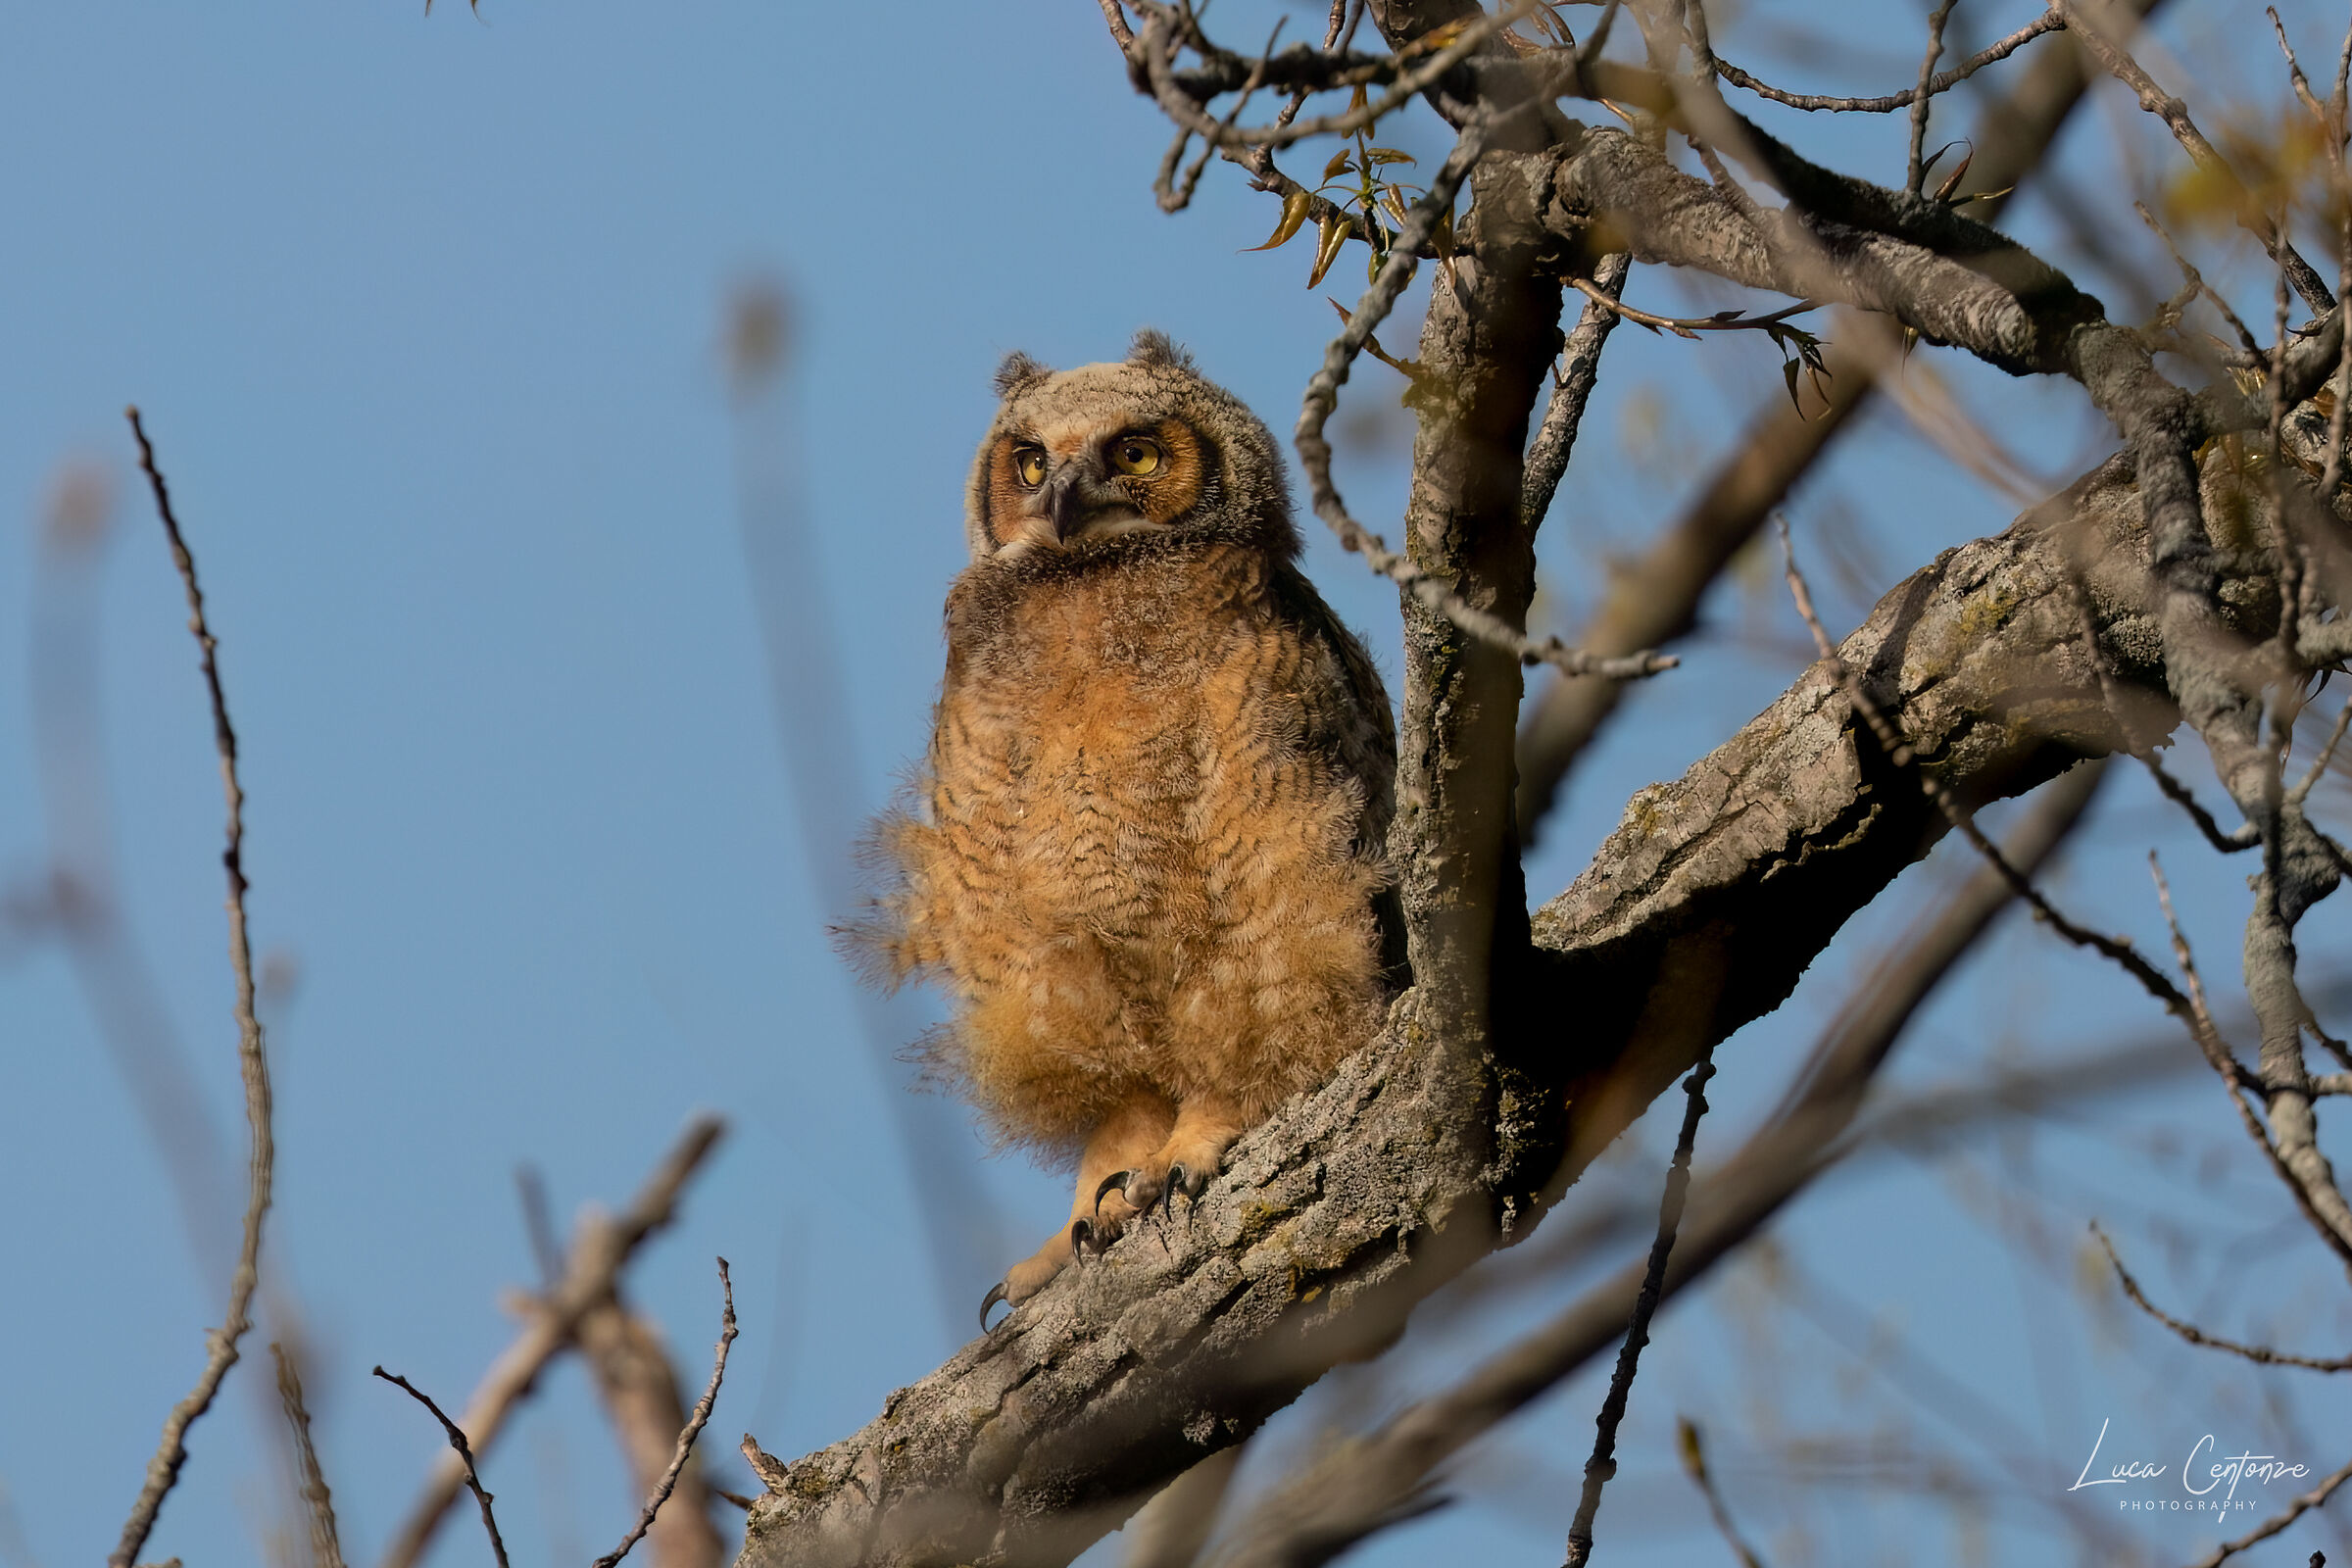 Piccolo di Great Horned Owl...